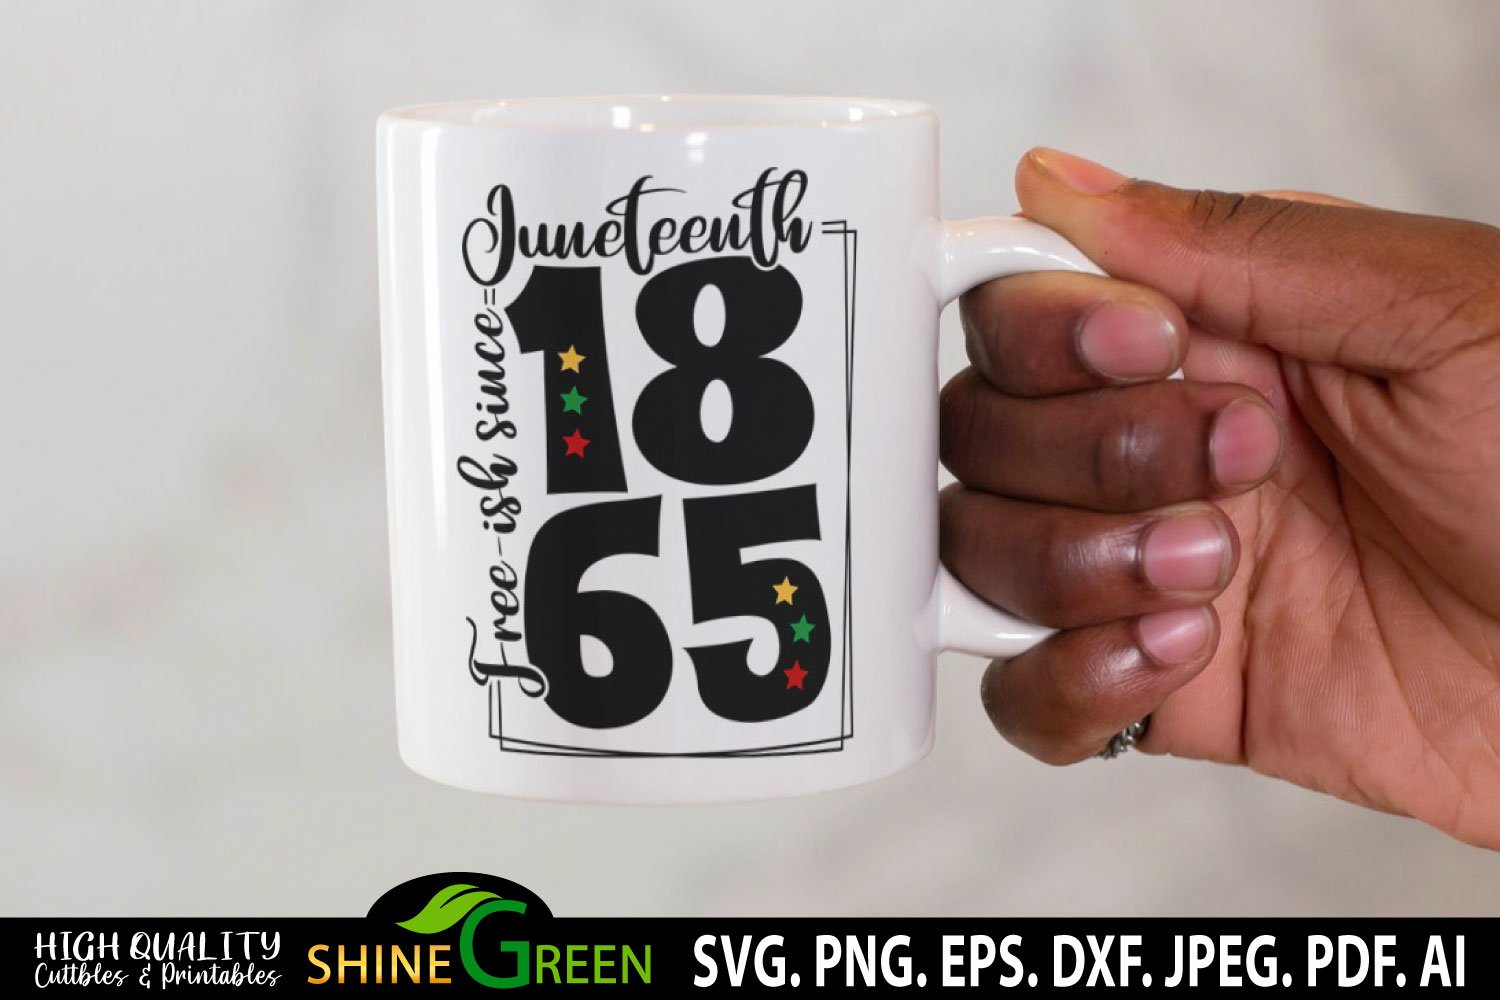 White cup with colorful images in Juneteenth styles